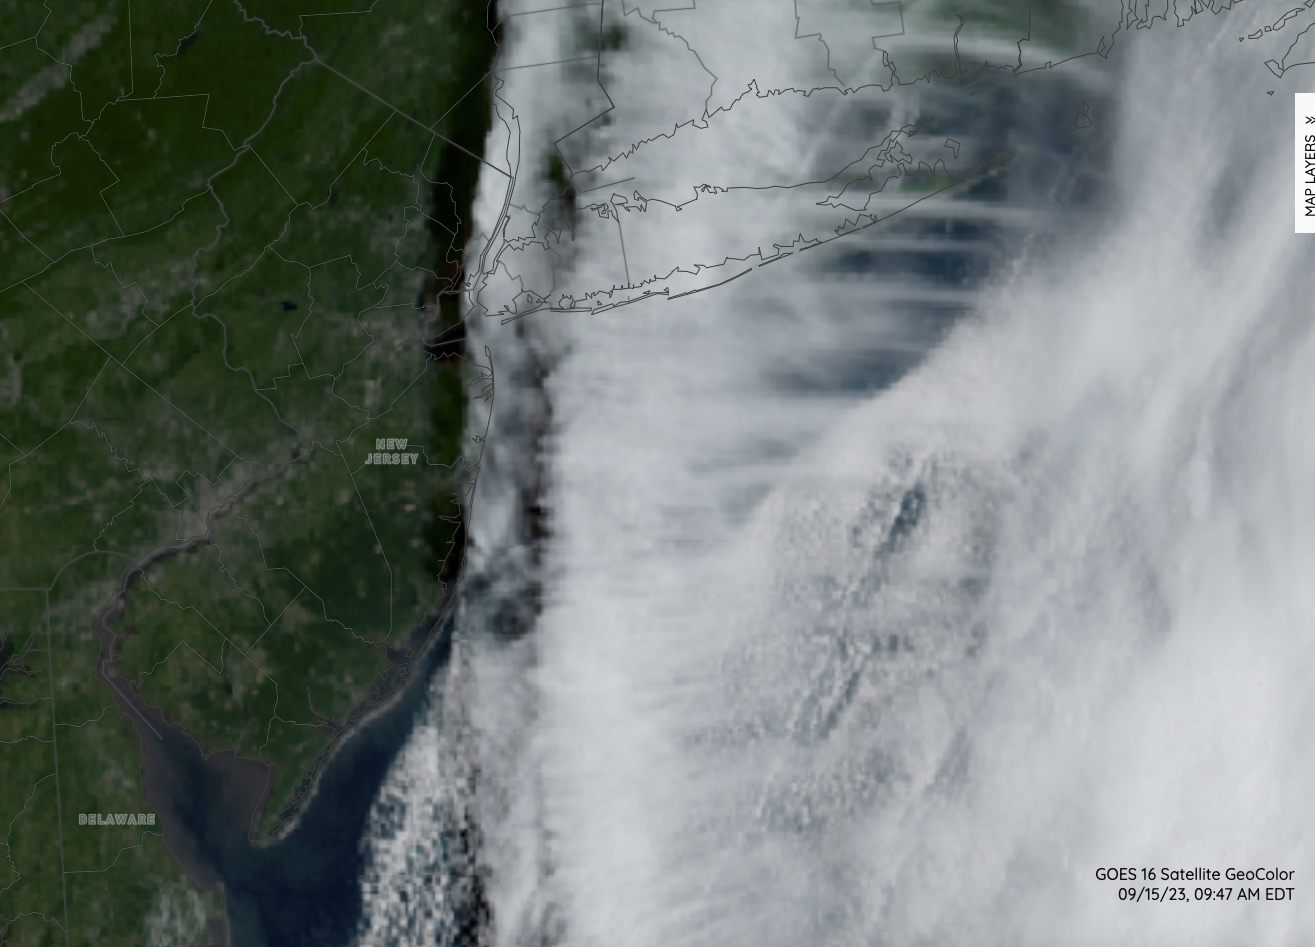 NOAA GOES visible image at 9:47 AM EDT on September 15 showing the western periphery of Hurricane Lee and the shadow being cast just to the west of the cloud line over eastern NJ.